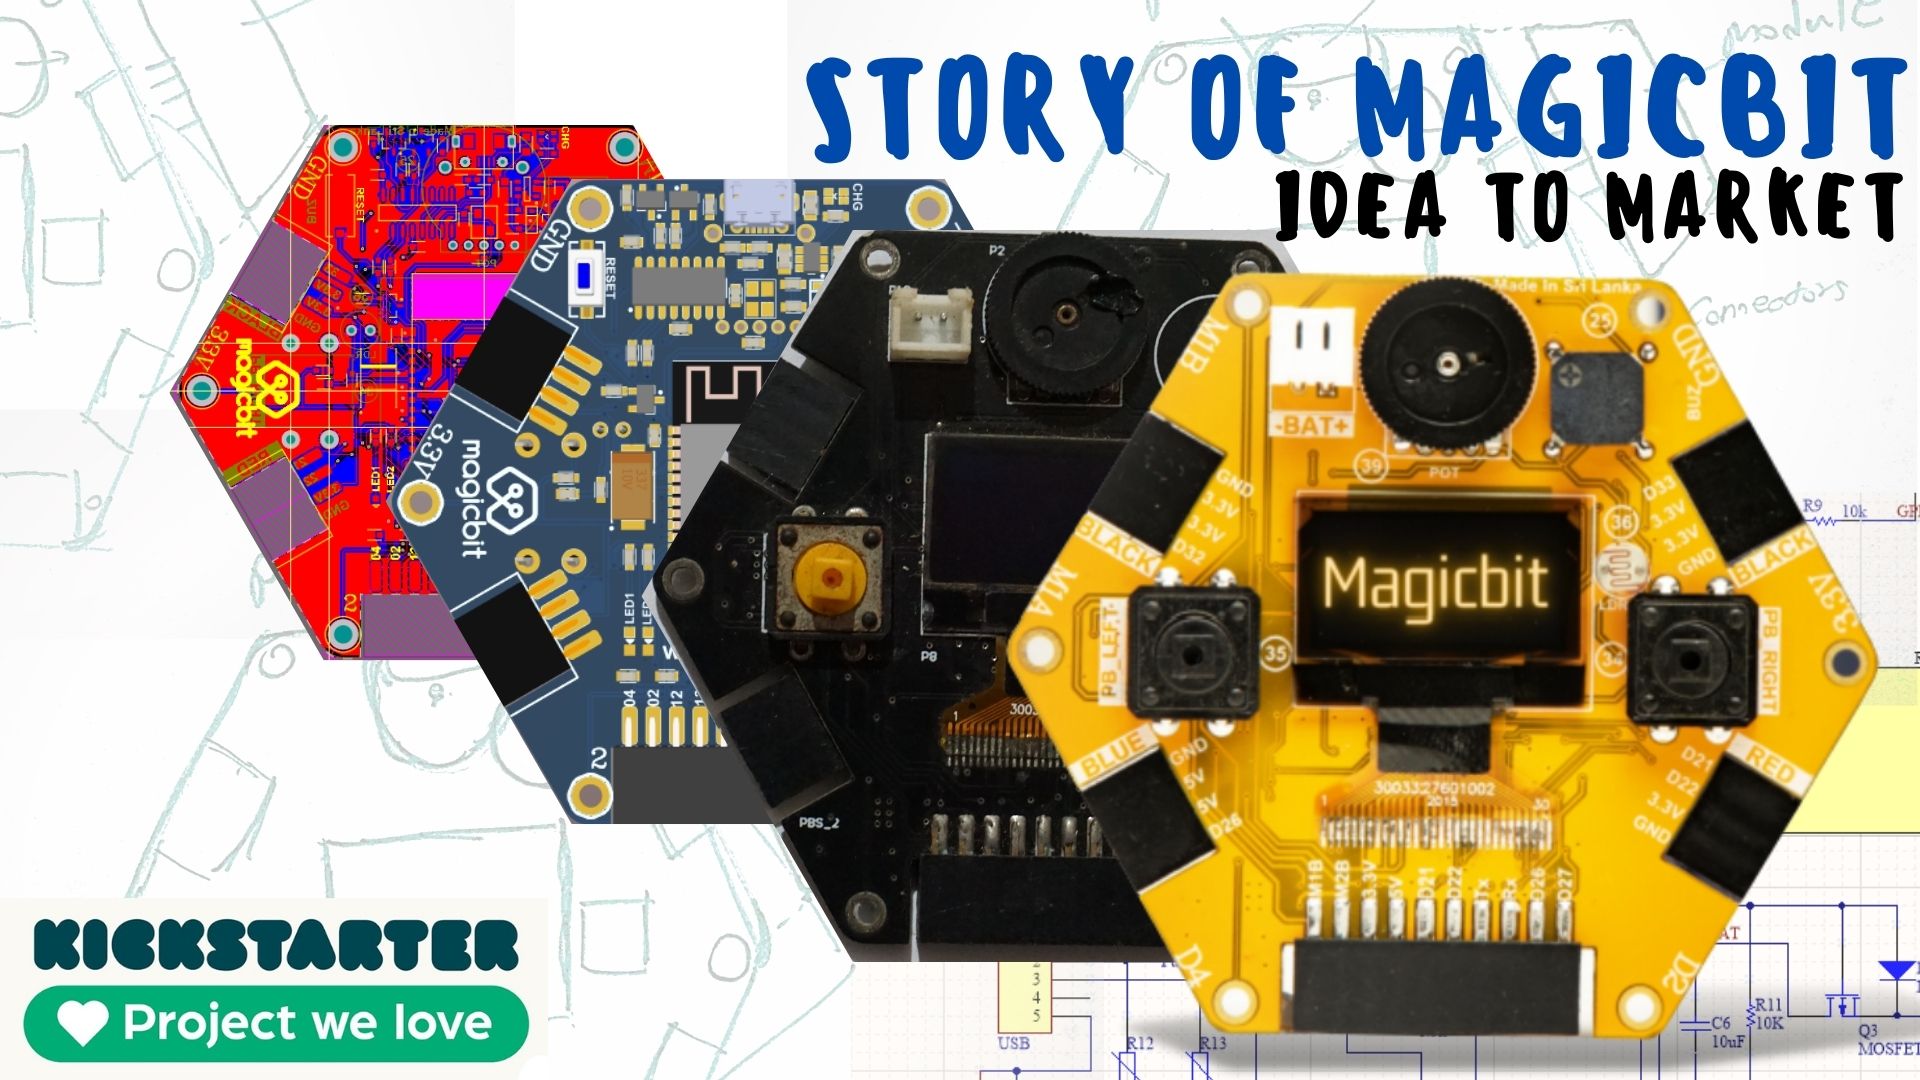 The Story of Magicbit - idea to market